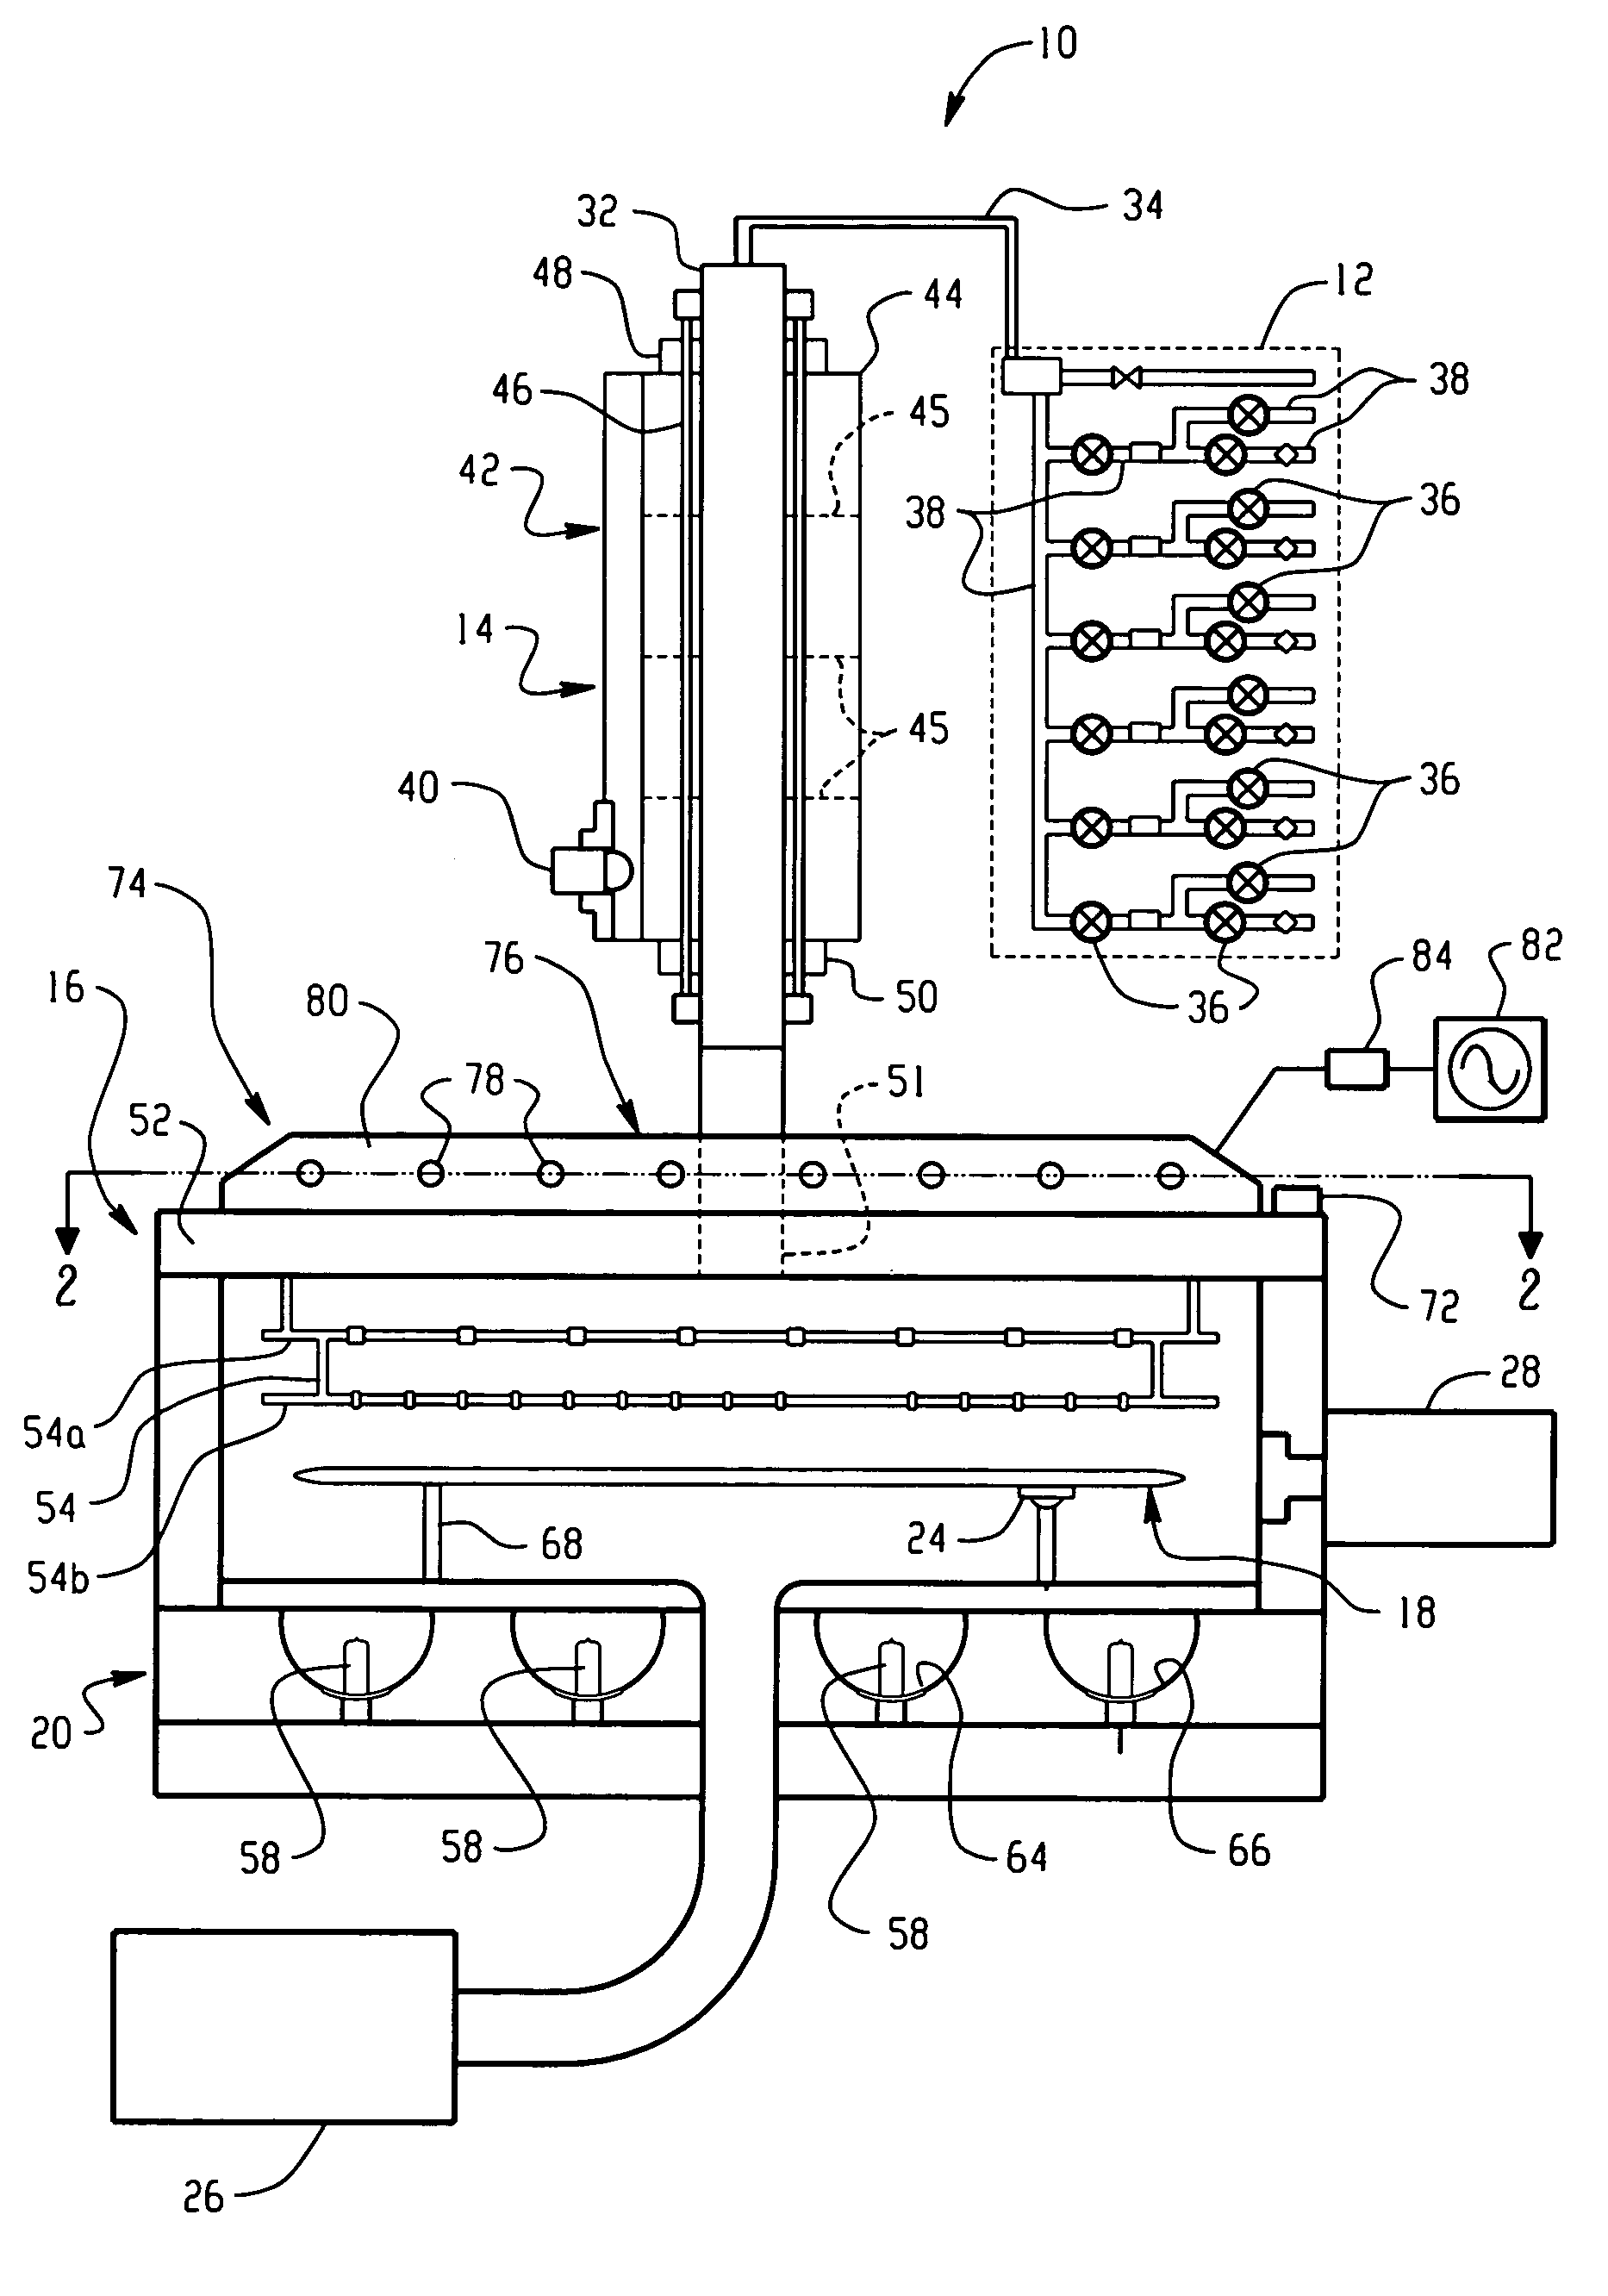 Method and apparatus for micro-jet enabled, low energy ion generation and transport in plasma processing